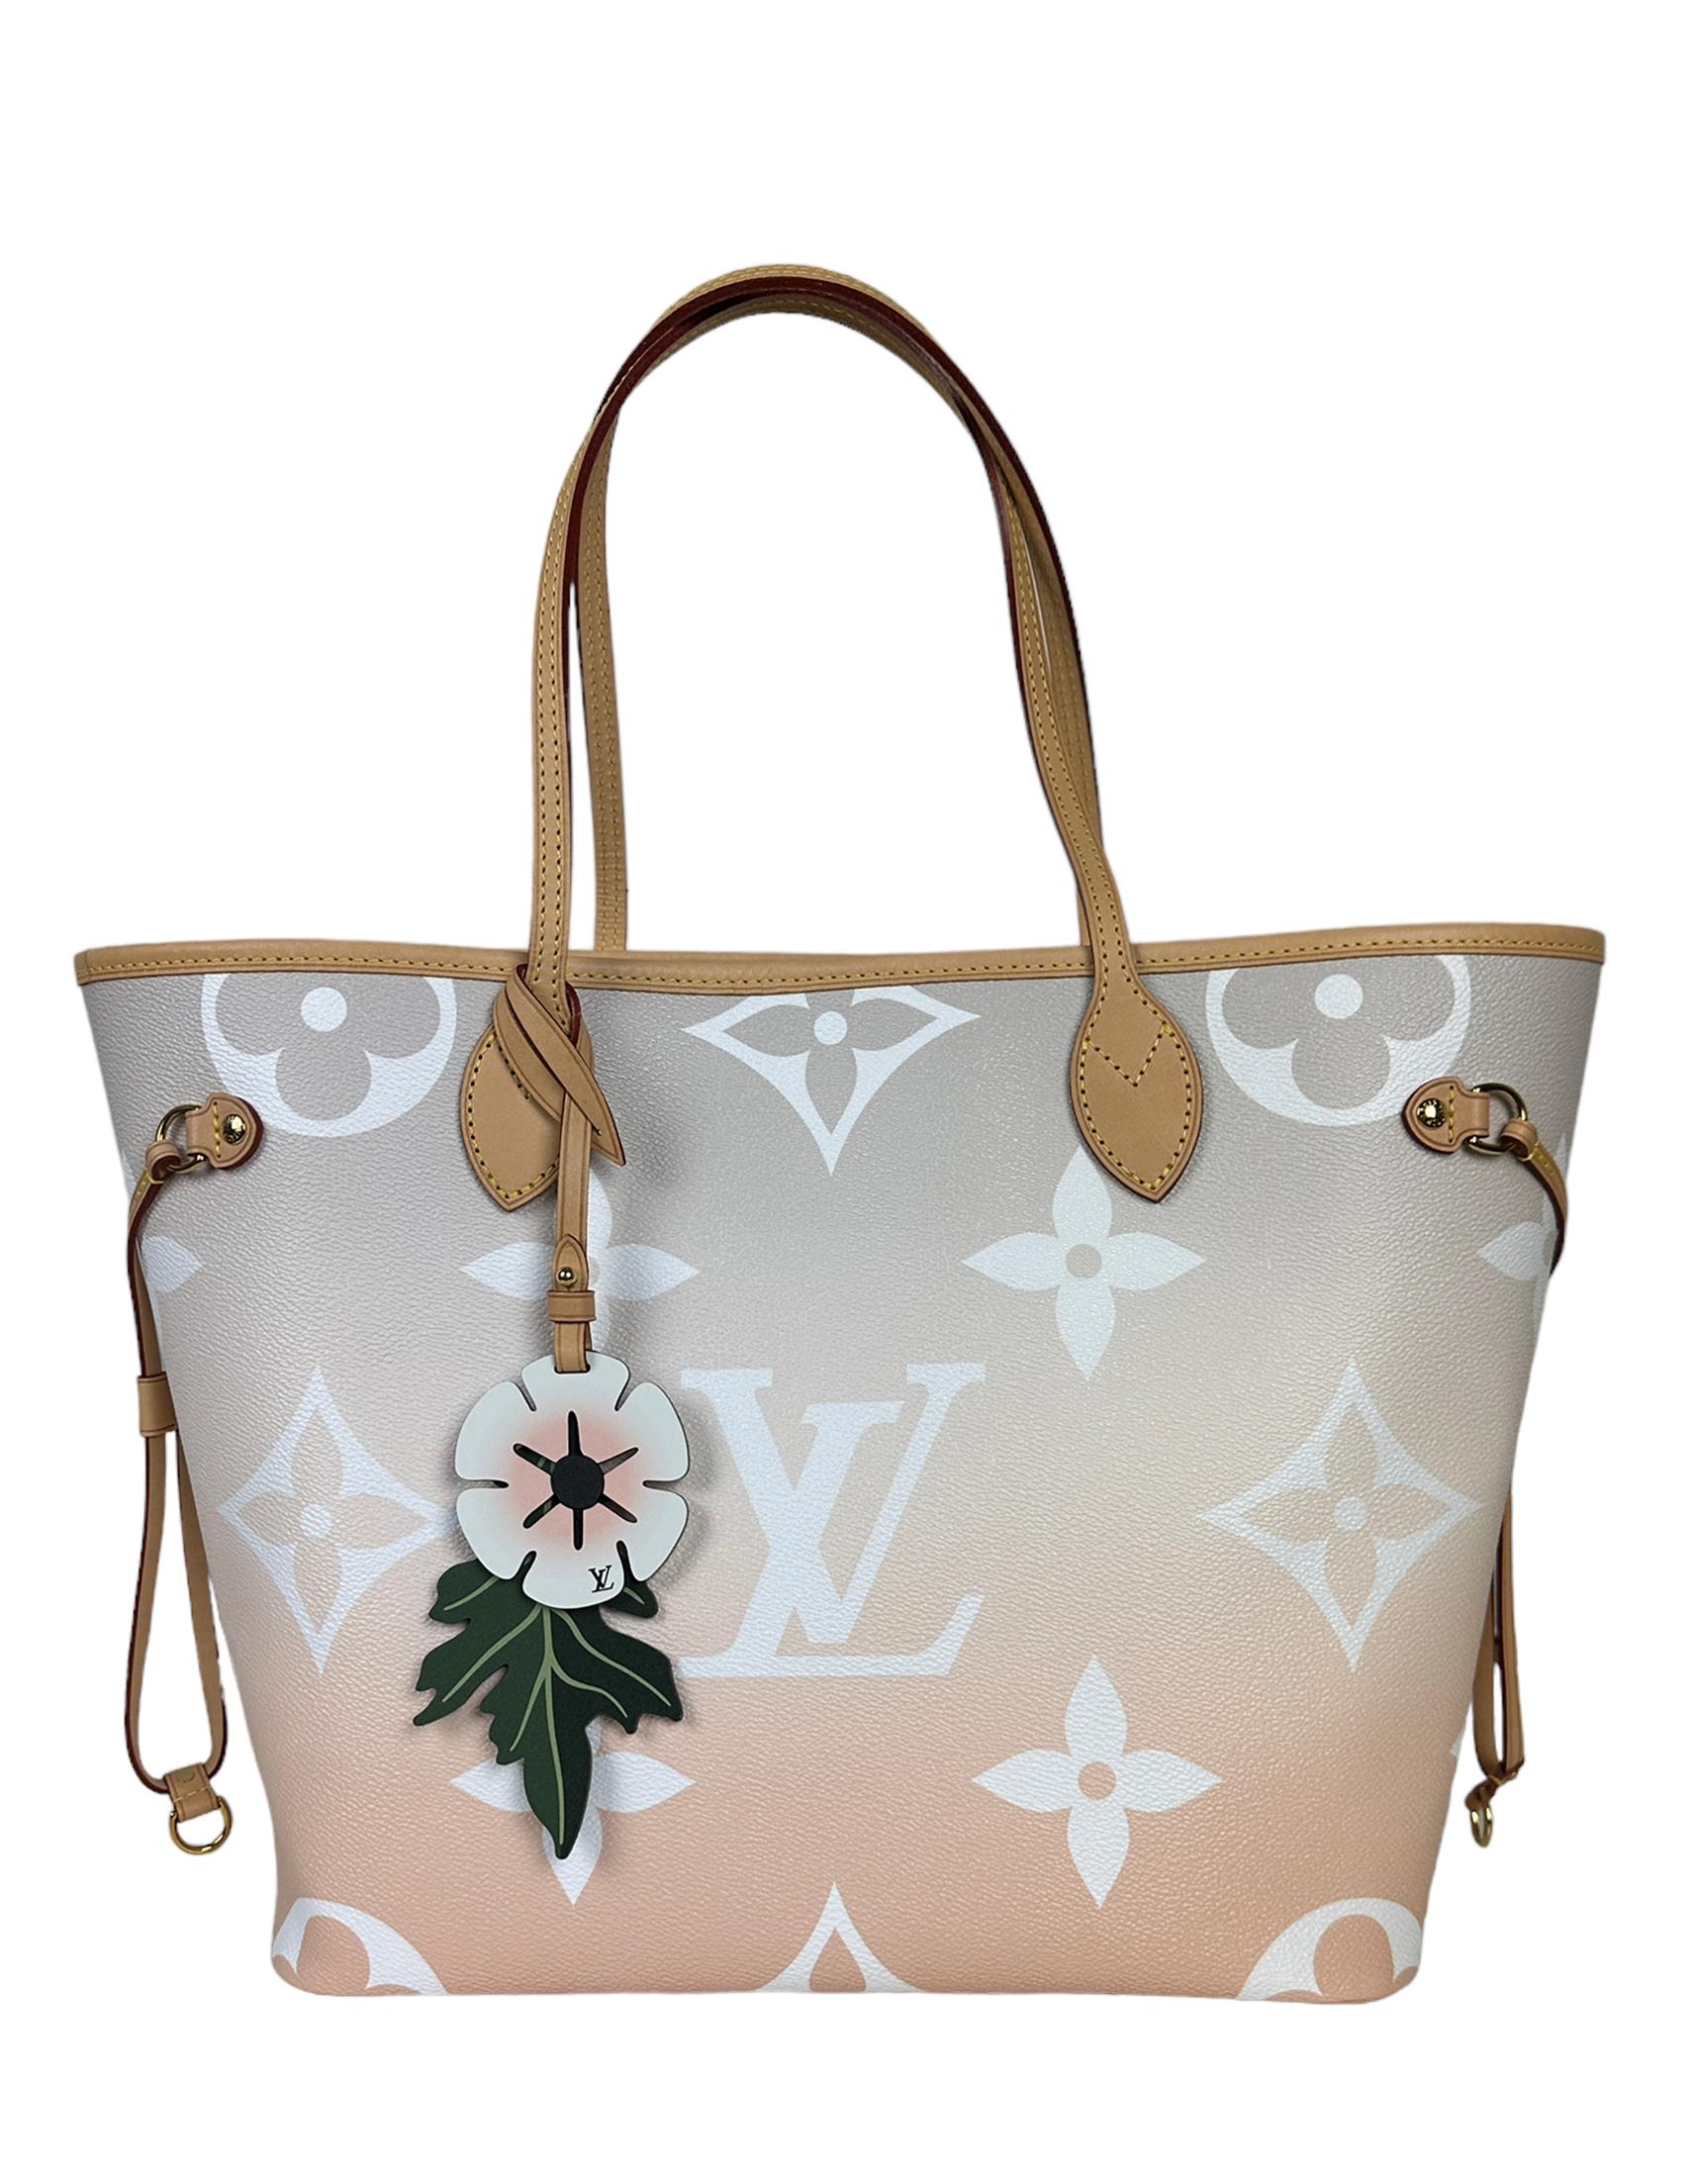 Louis Vuitton Brume Monogram Giant By The Pool Neverfull MM Tote Bag

Made In:
Year of Production: 2021
Color: Brume
Hardware: Goldtone
Materials: Coated canvas, vachetta leather trim
Lining: Striped canvas
Closure/Opening: Open top with center